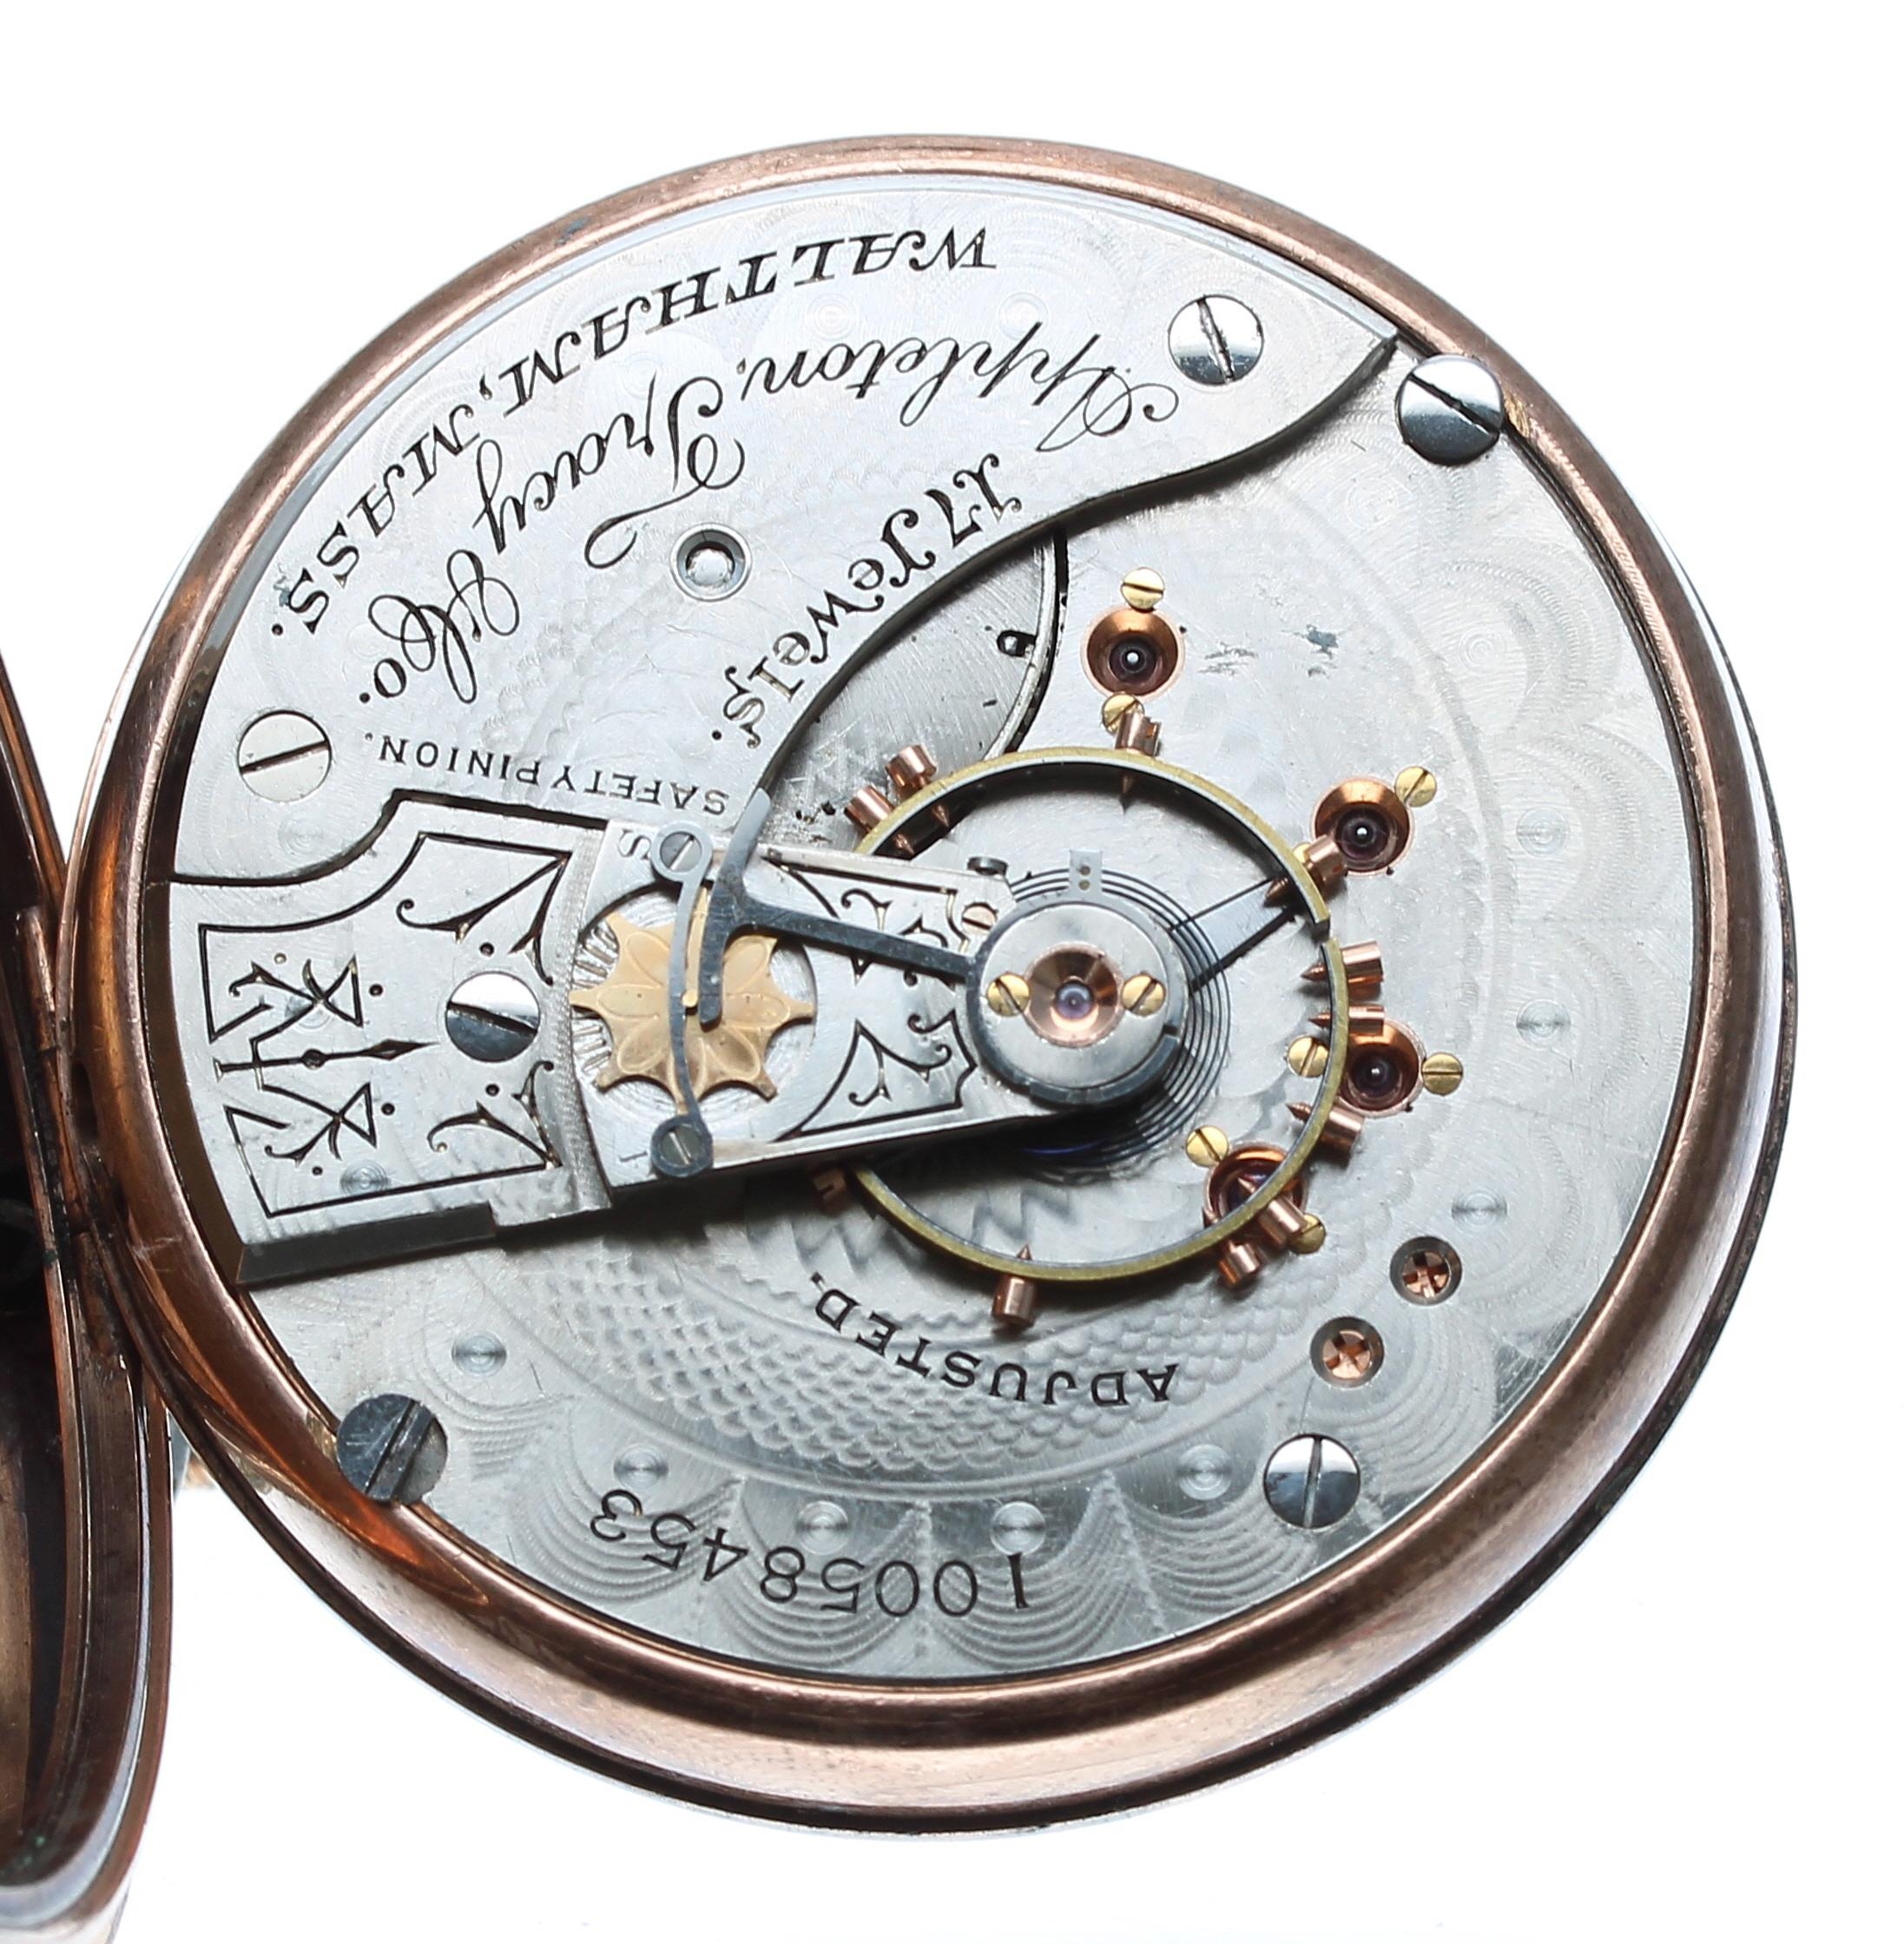 American Waltham 'Appleton Tracy & Co.' gold plated lever pocket watch, circa 1900, signed 17 - Image 3 of 4